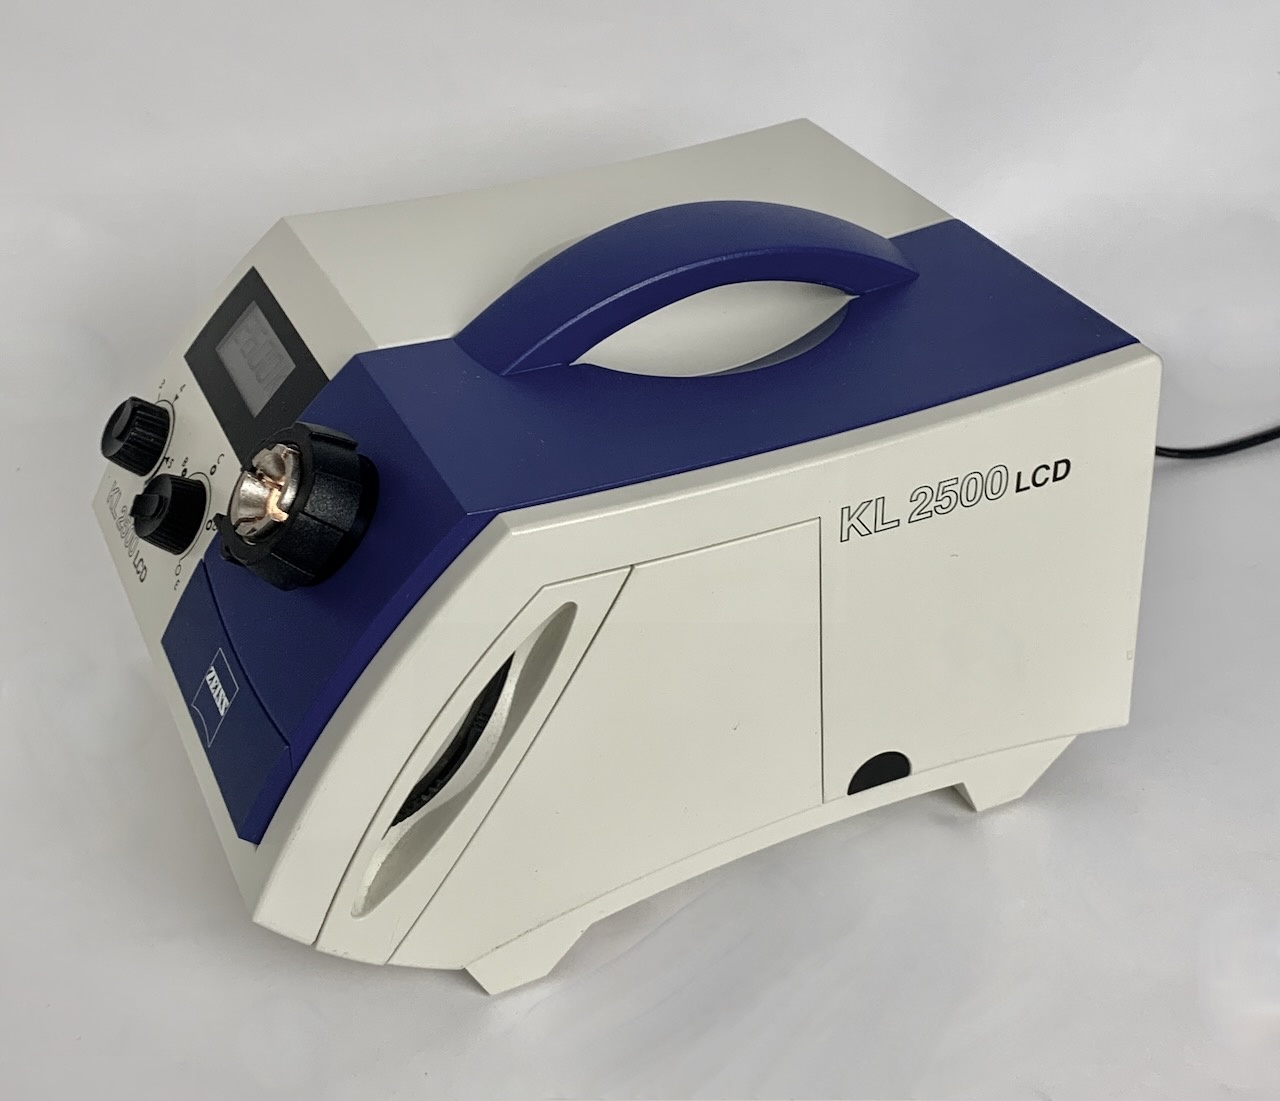 Zeiss KL 2500 LCD cold-light source